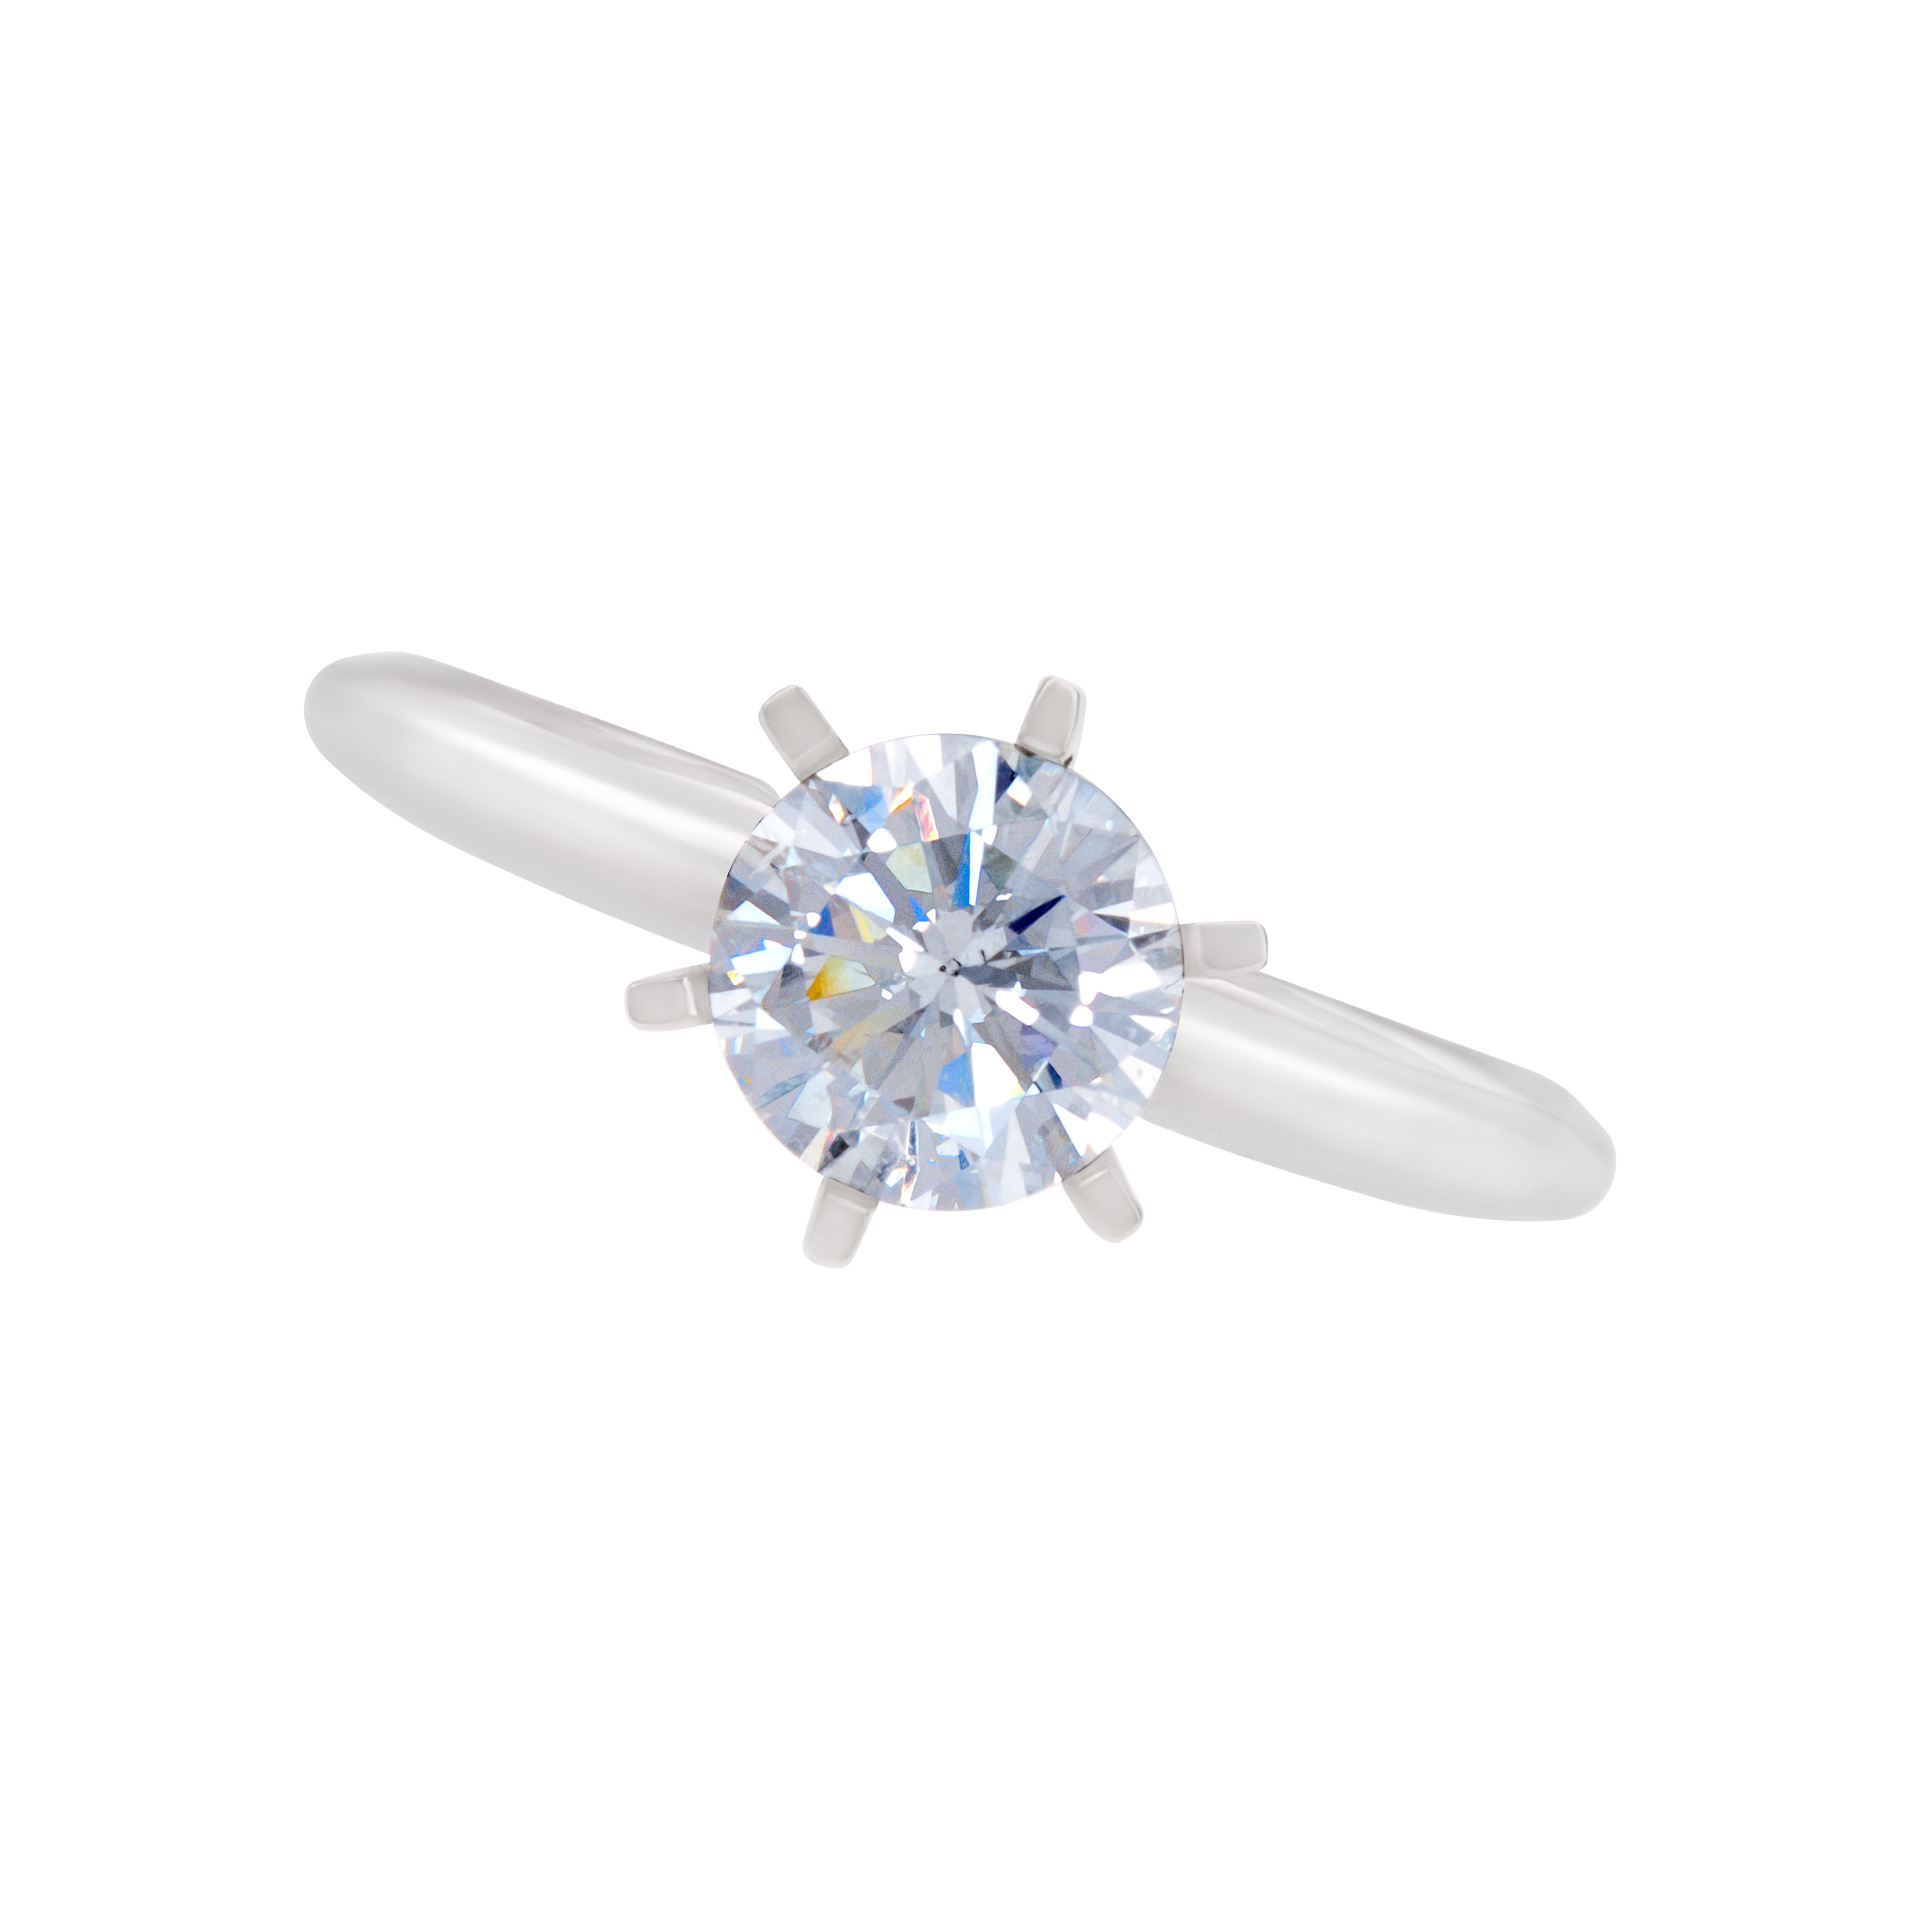 GIA Certified Round Diamond 1.02cts  (G Color I-1 Clarity). Set in 18k white gold stud